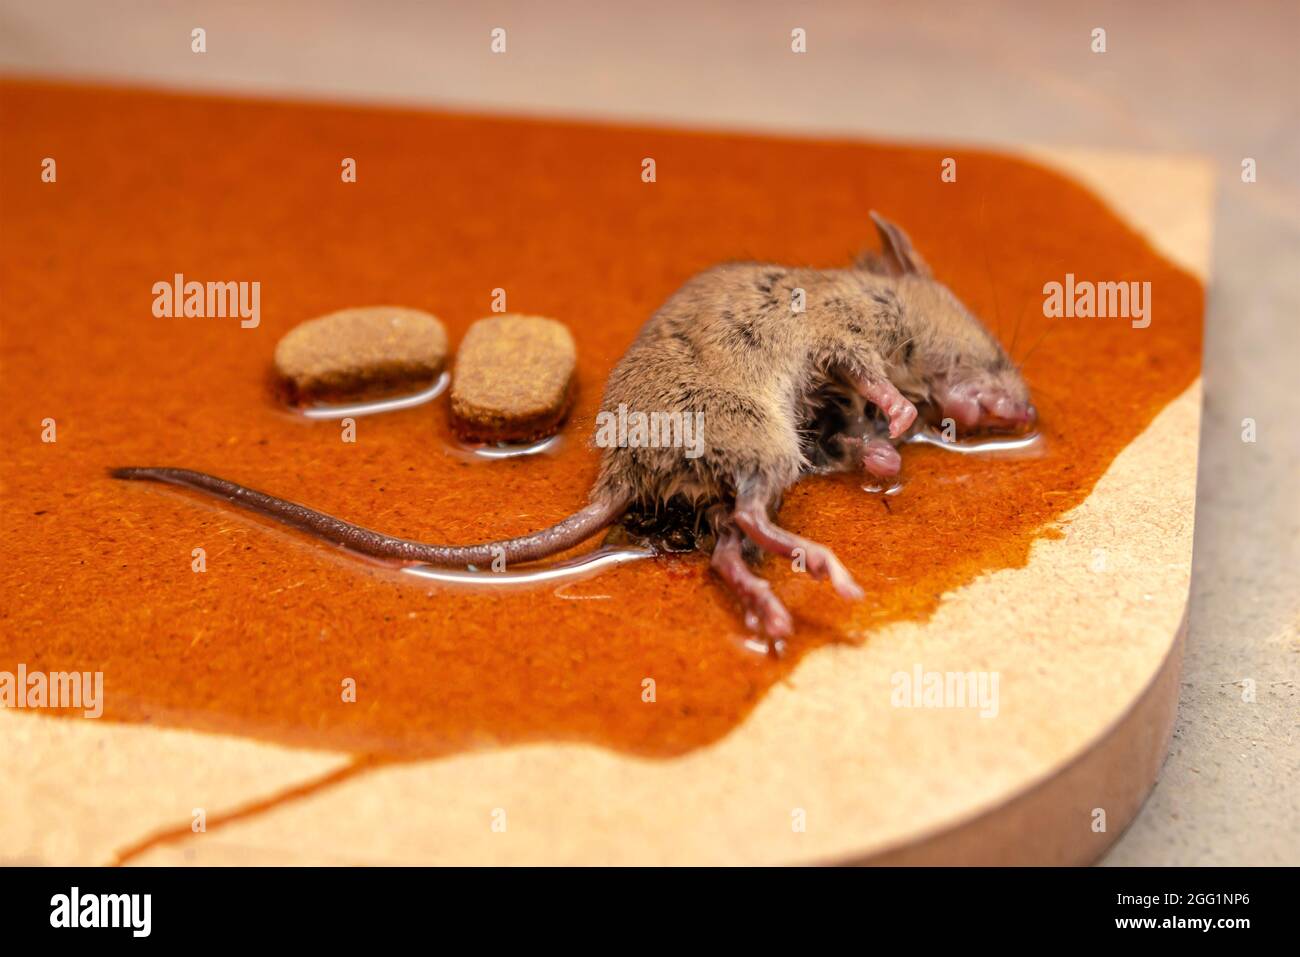 https://c8.alamy.com/comp/2GG1NP6/a-mouse-or-rat-is-caught-in-a-glue-trap-with-cookies-as-bait-glue-for-catching-rodents-or-small-pests-2GG1NP6.jpg